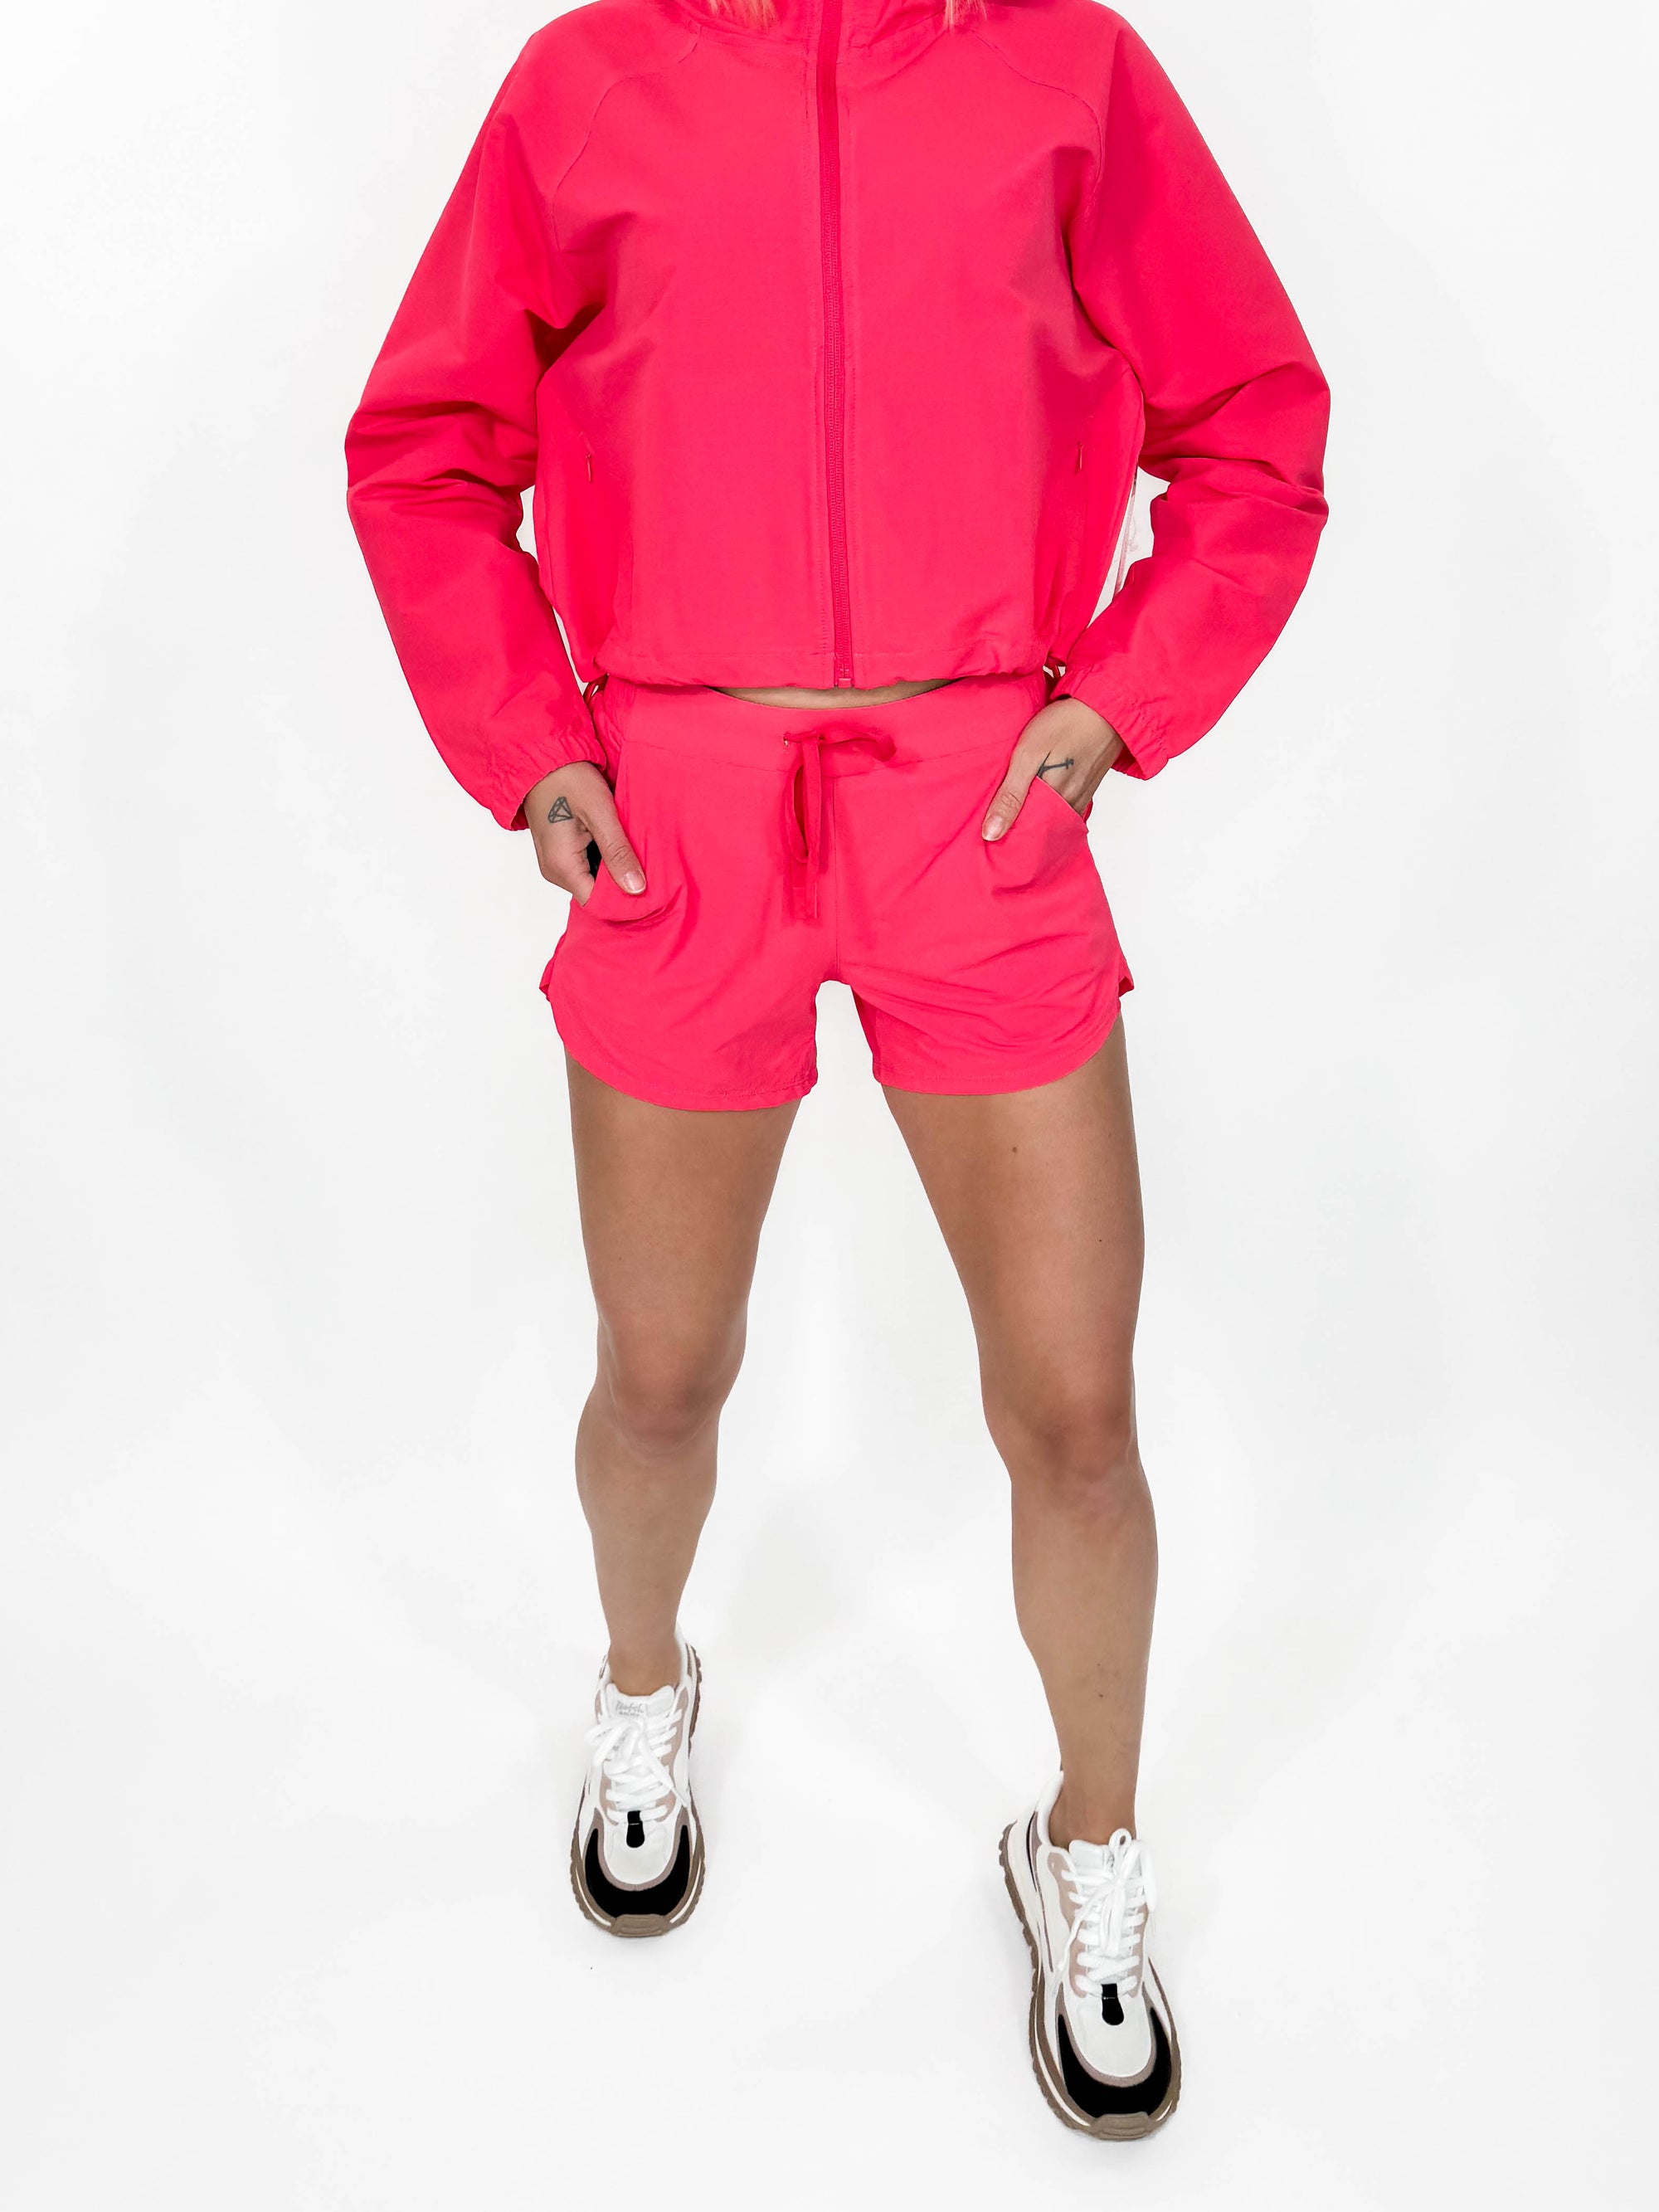 Lulu Lime Athleisure Shorts- BRIGHT PINK-FINAL SALE